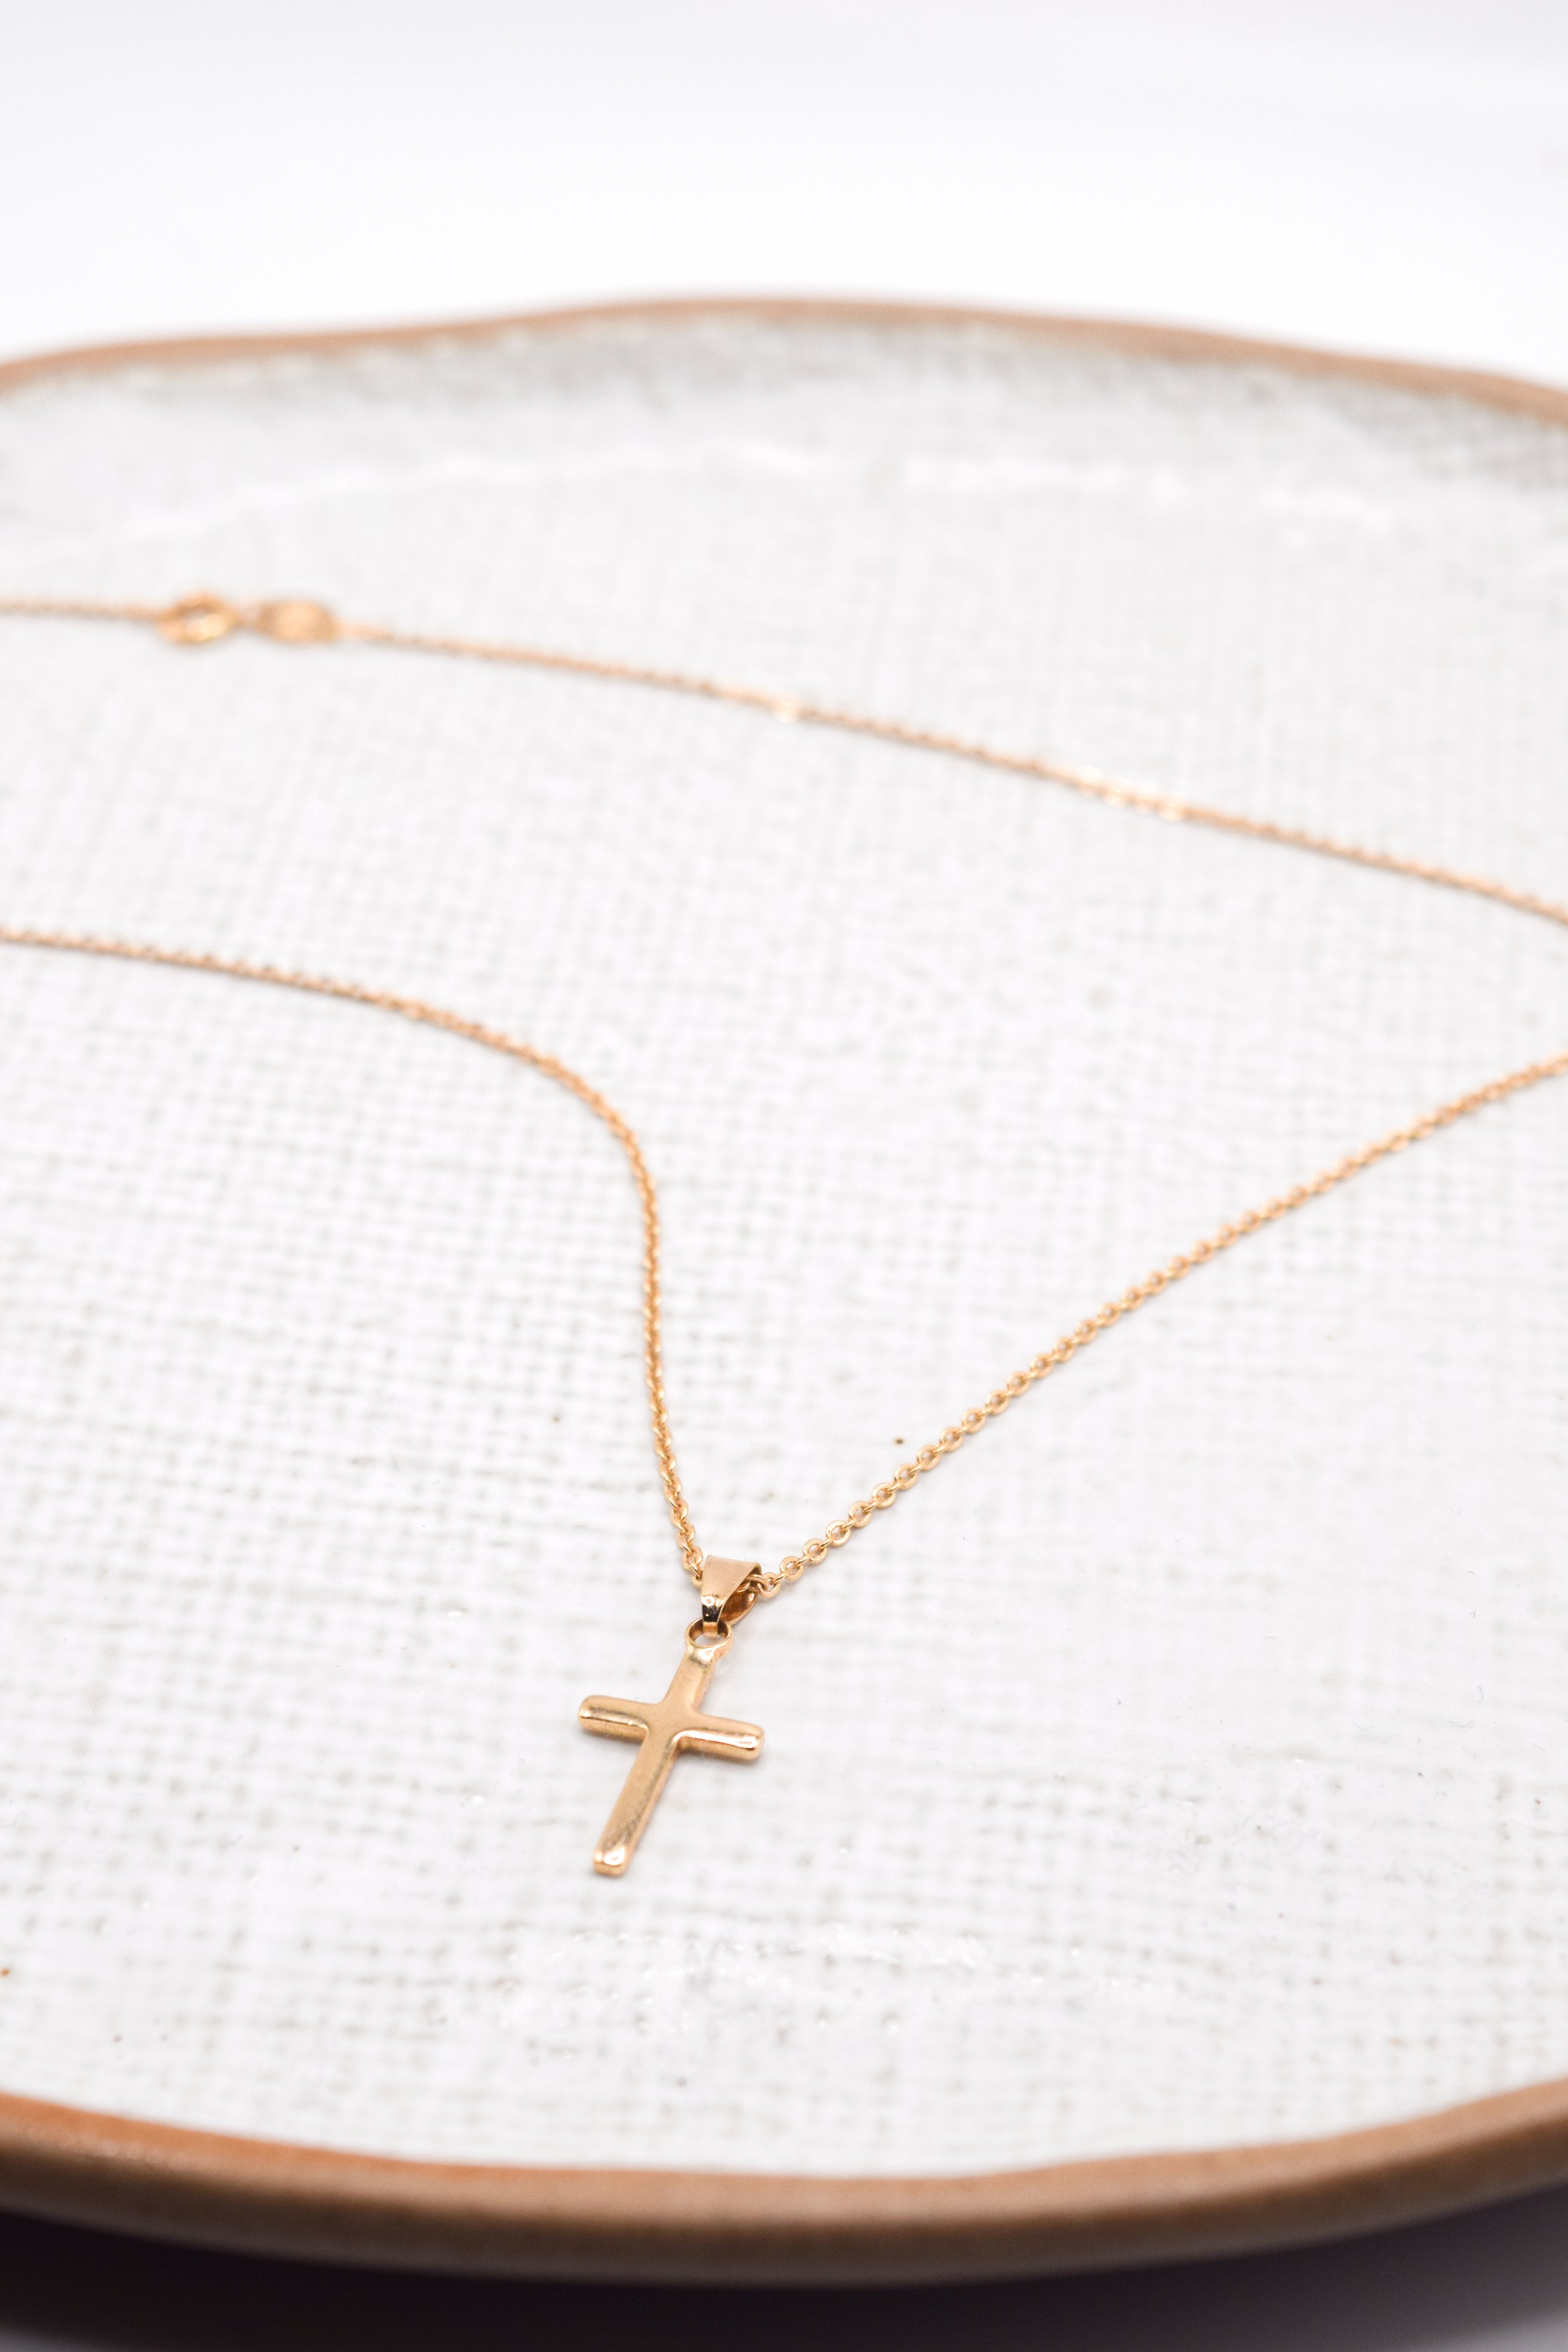 DIANA'S DAINTY CROSS NECKLACE - GOLD – Boujee Barn Boutique LLC